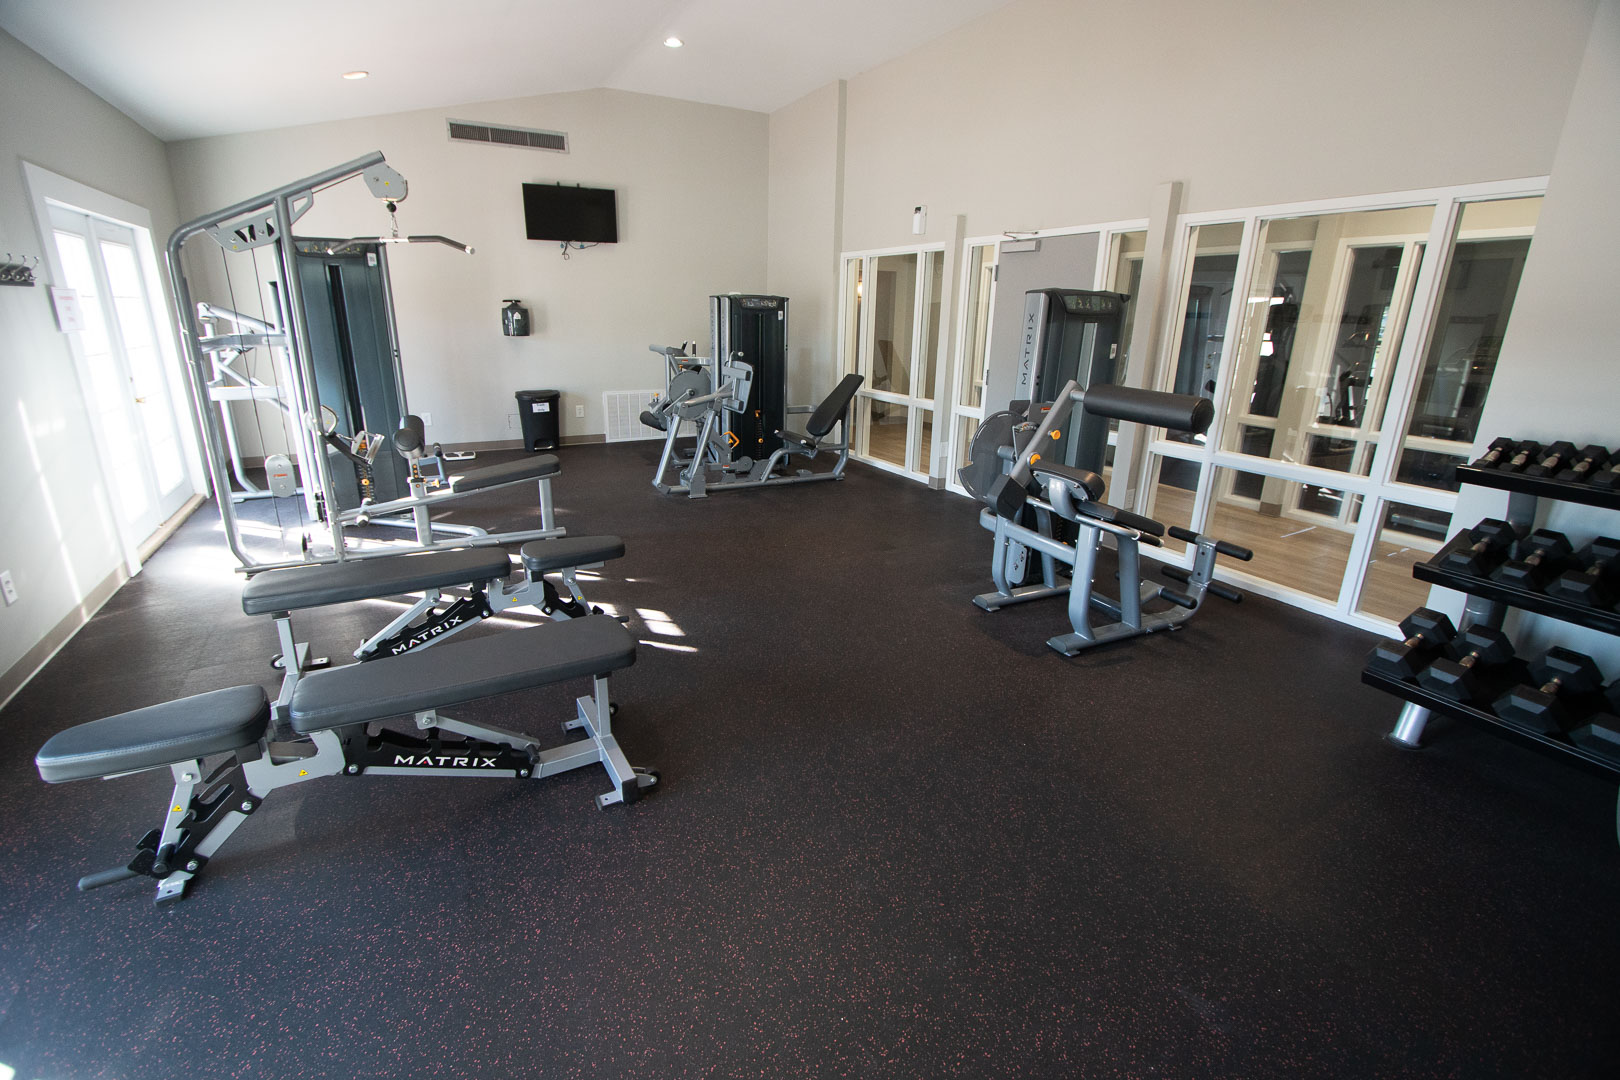 A fully equipped exercise room at VRI's Sandcastle Village in New Bern, North Carolina.